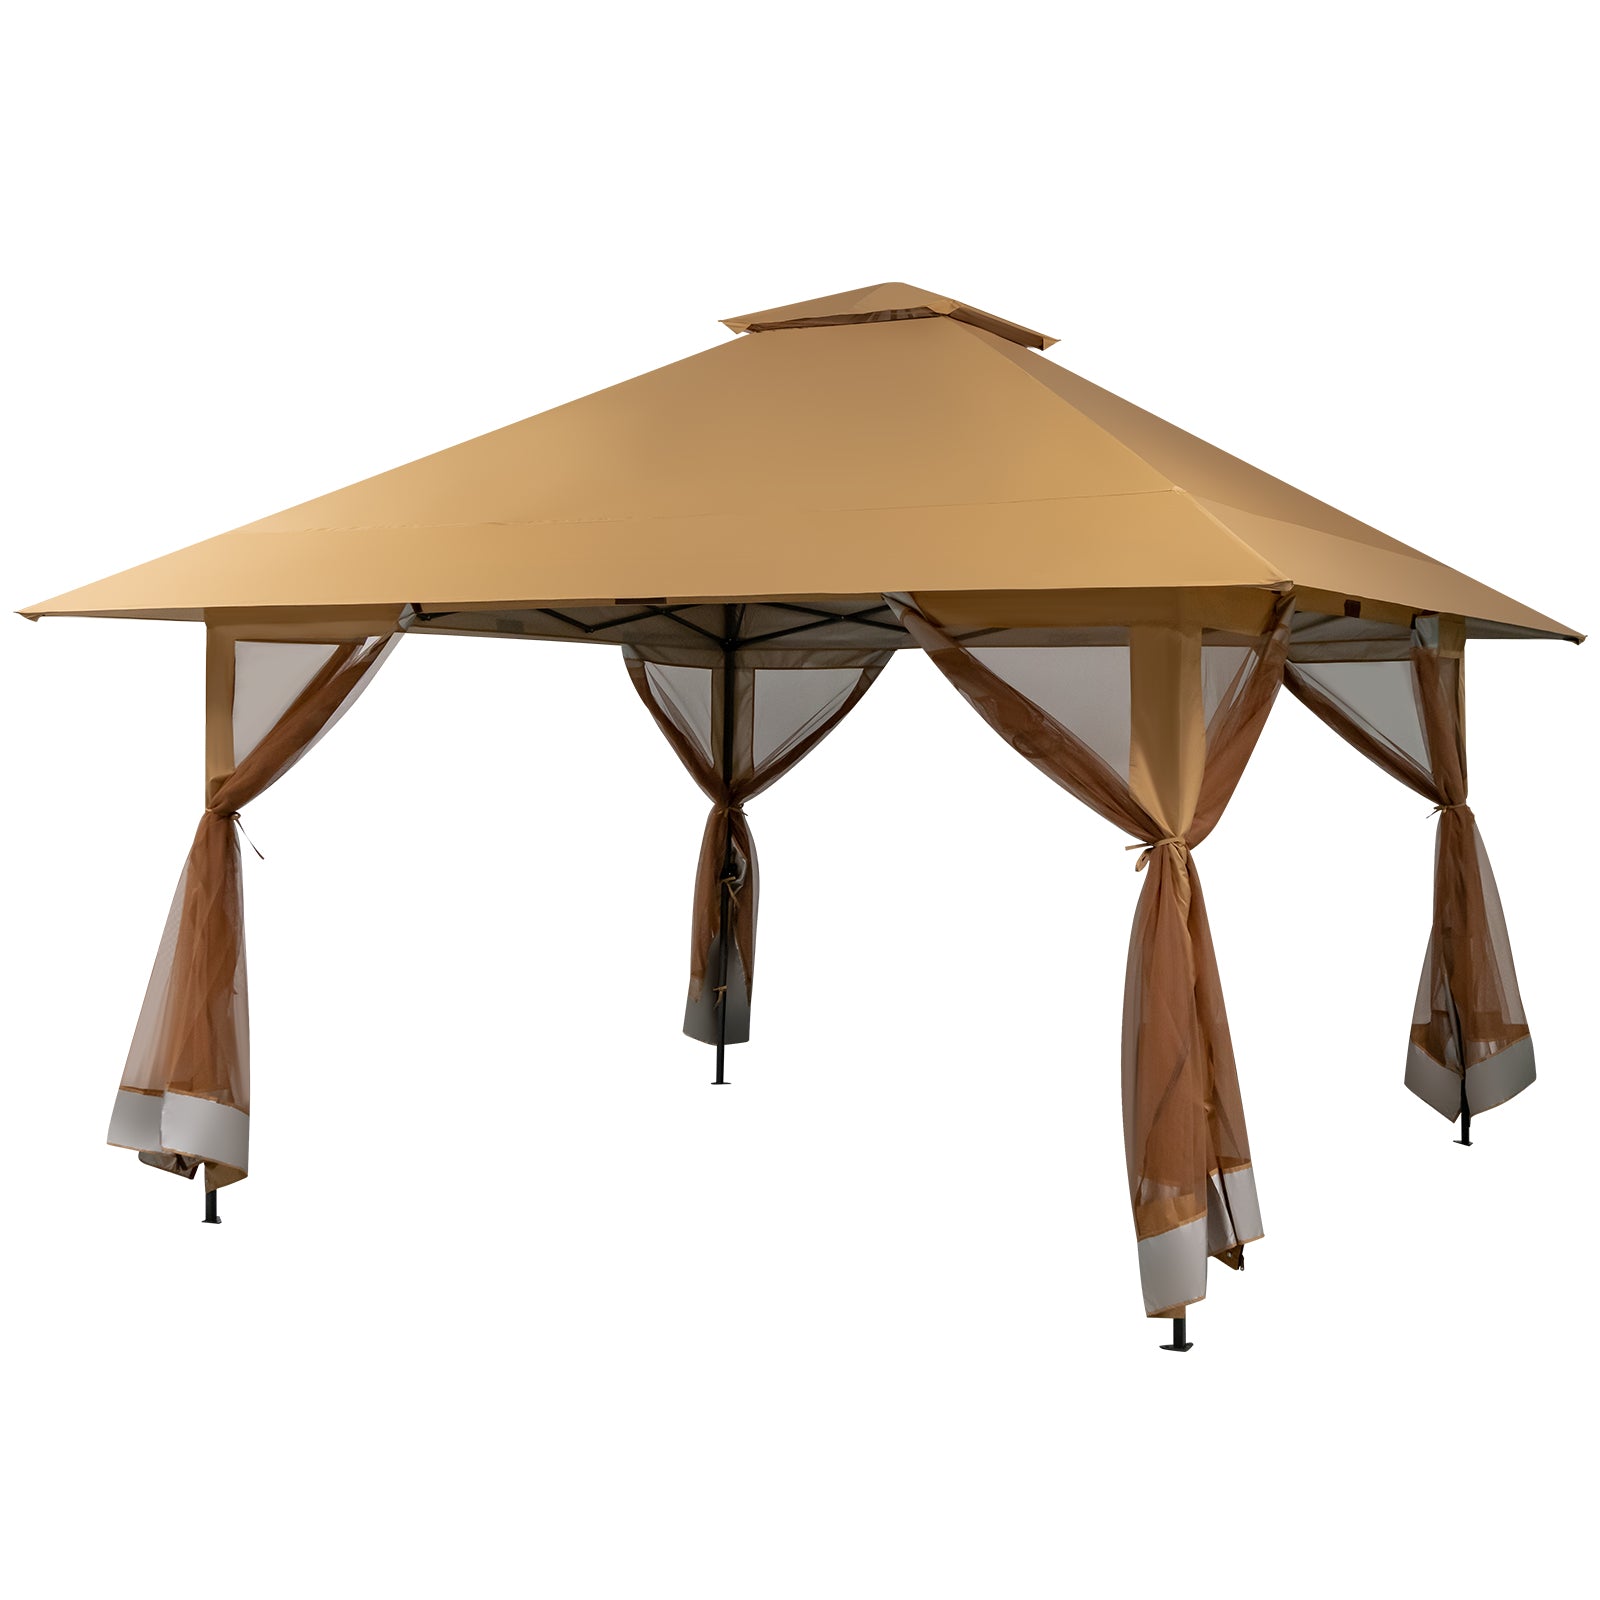 4 x 4m Pop-up Gazebo with Mesh Sidewalls and Adjustable Height-Brown